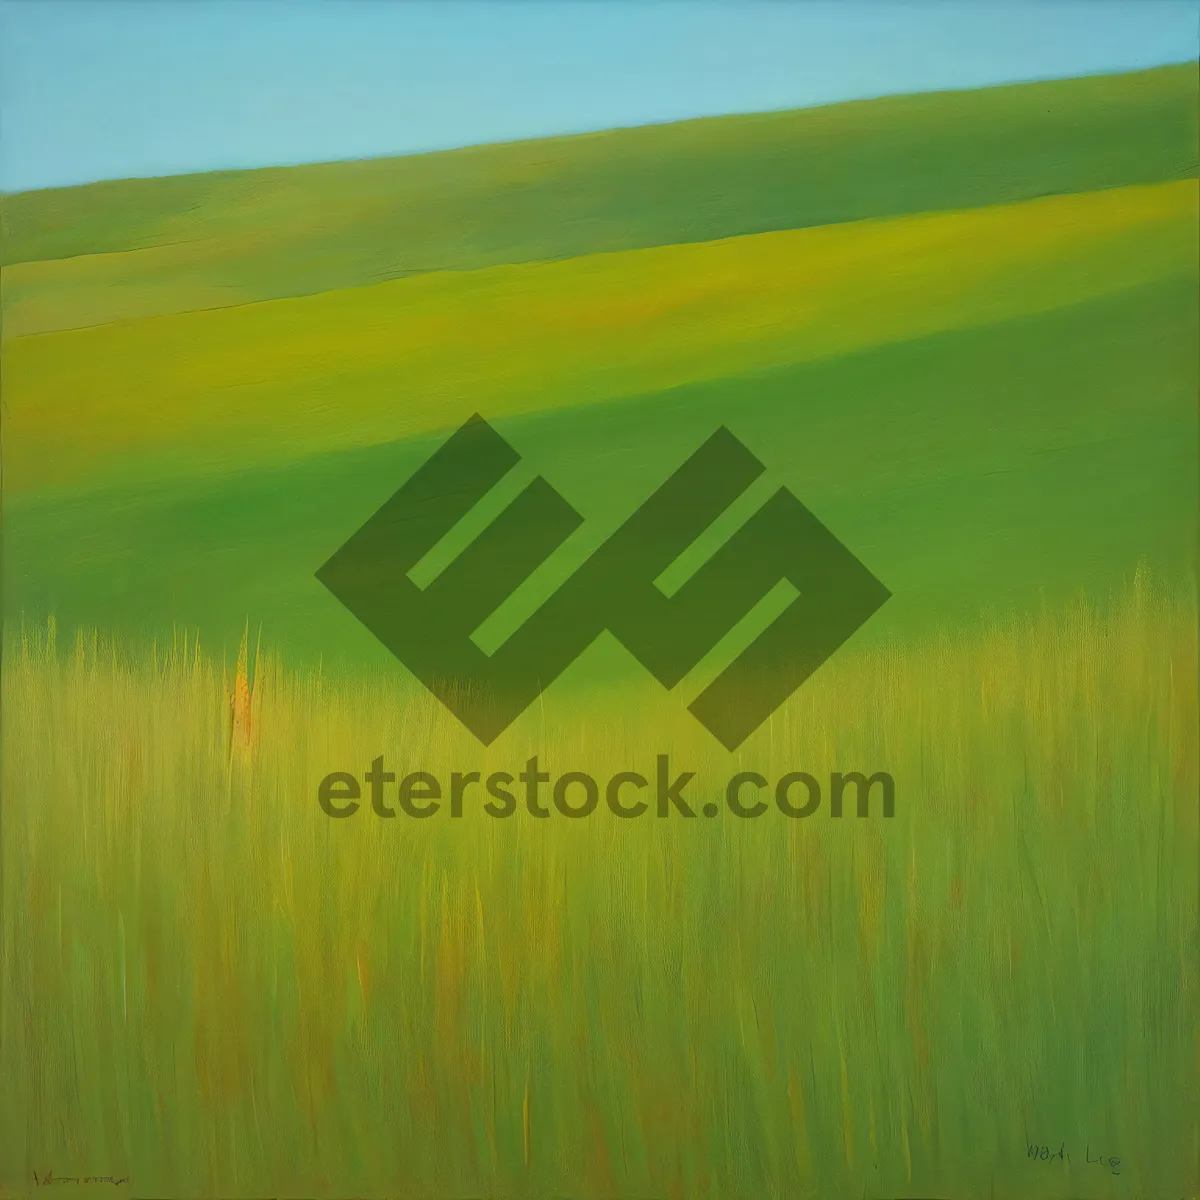 Picture of Sprawling Golden Wheat Fields against Blue Skies